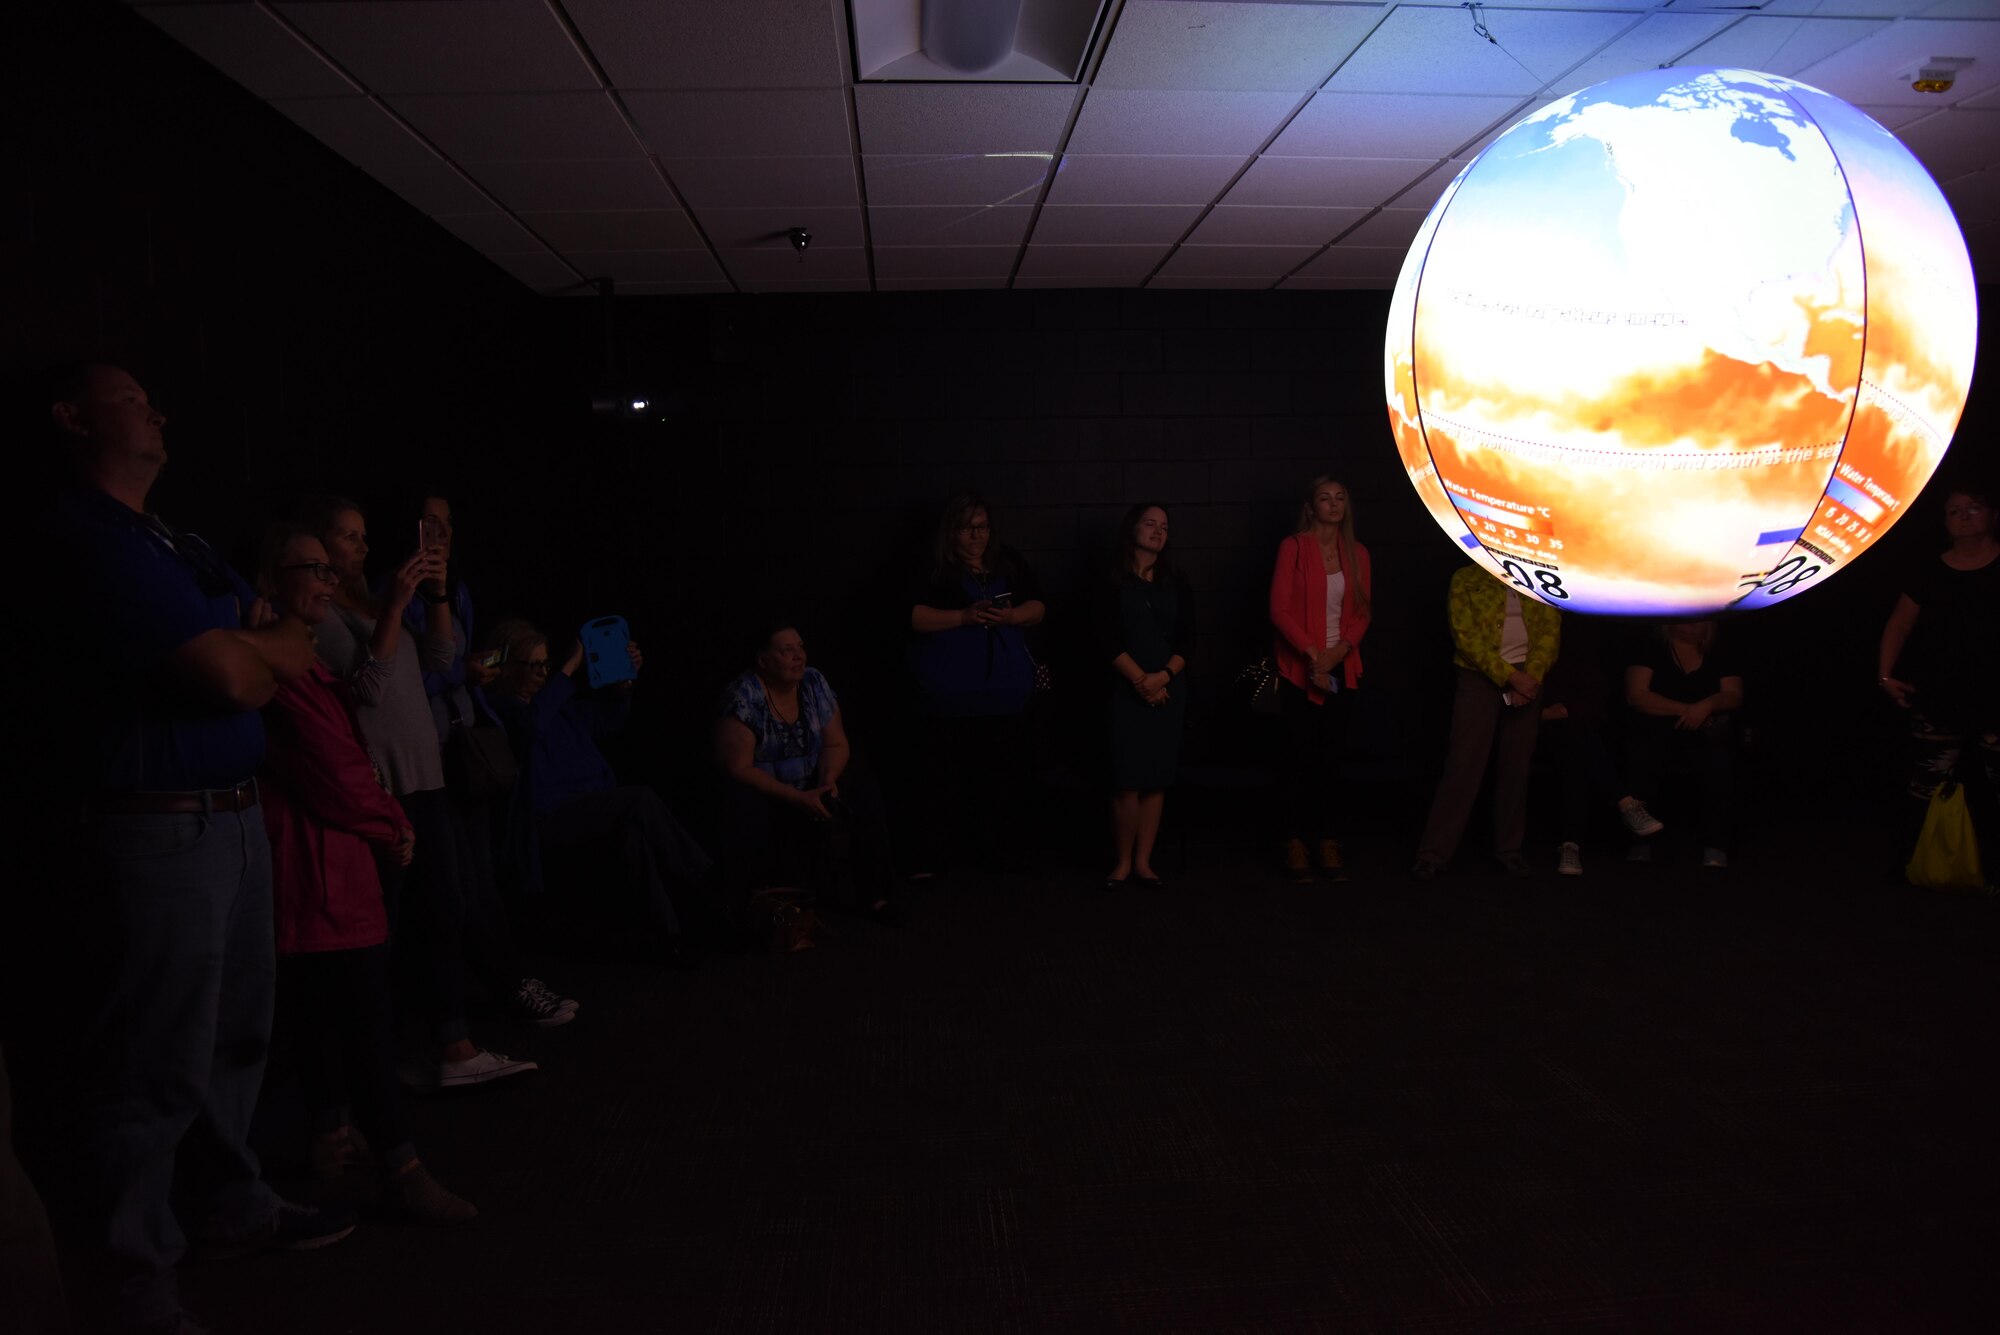 Educators receive a Science on a Sphere demonstration at the Weather Training Complex during a NASA Educator Workshop, March 30, 2017, on Keesler Air Force Base, Miss. NASA teamed up with 335th Training Squadron weather instructors and the 403rd Wing Hurricane Hunters to provide teachers from Mississippi and Louisiana with available resources, techniques and best practices for use in their classrooms. (U.S. Air Force photo by Kemberly Groue)